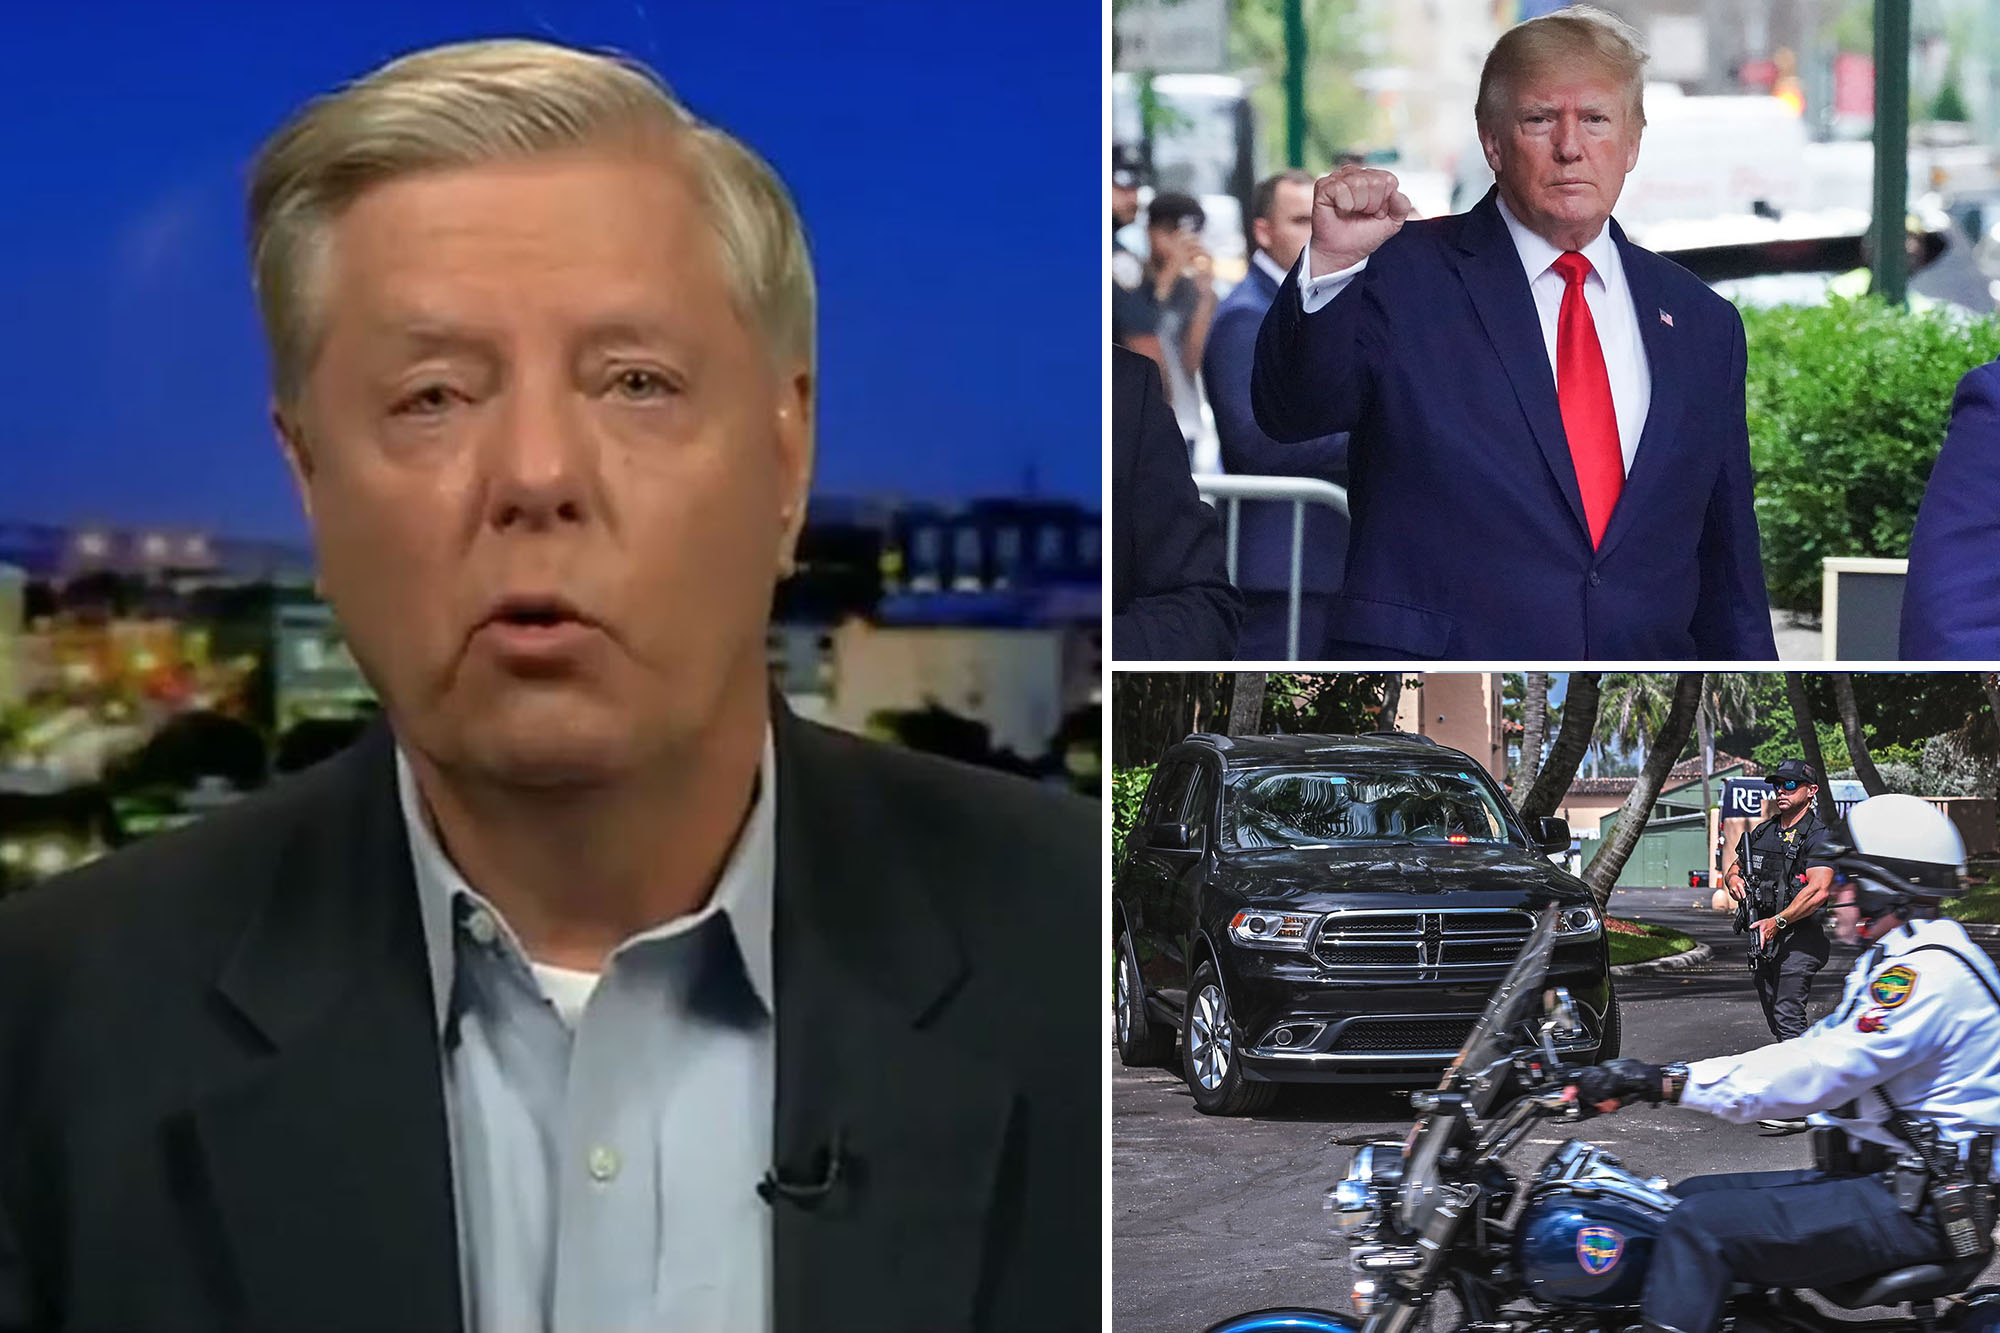 Sen. Lindsey Graham warns of "riots in the street" if former President Donald Trump is prosecuted.